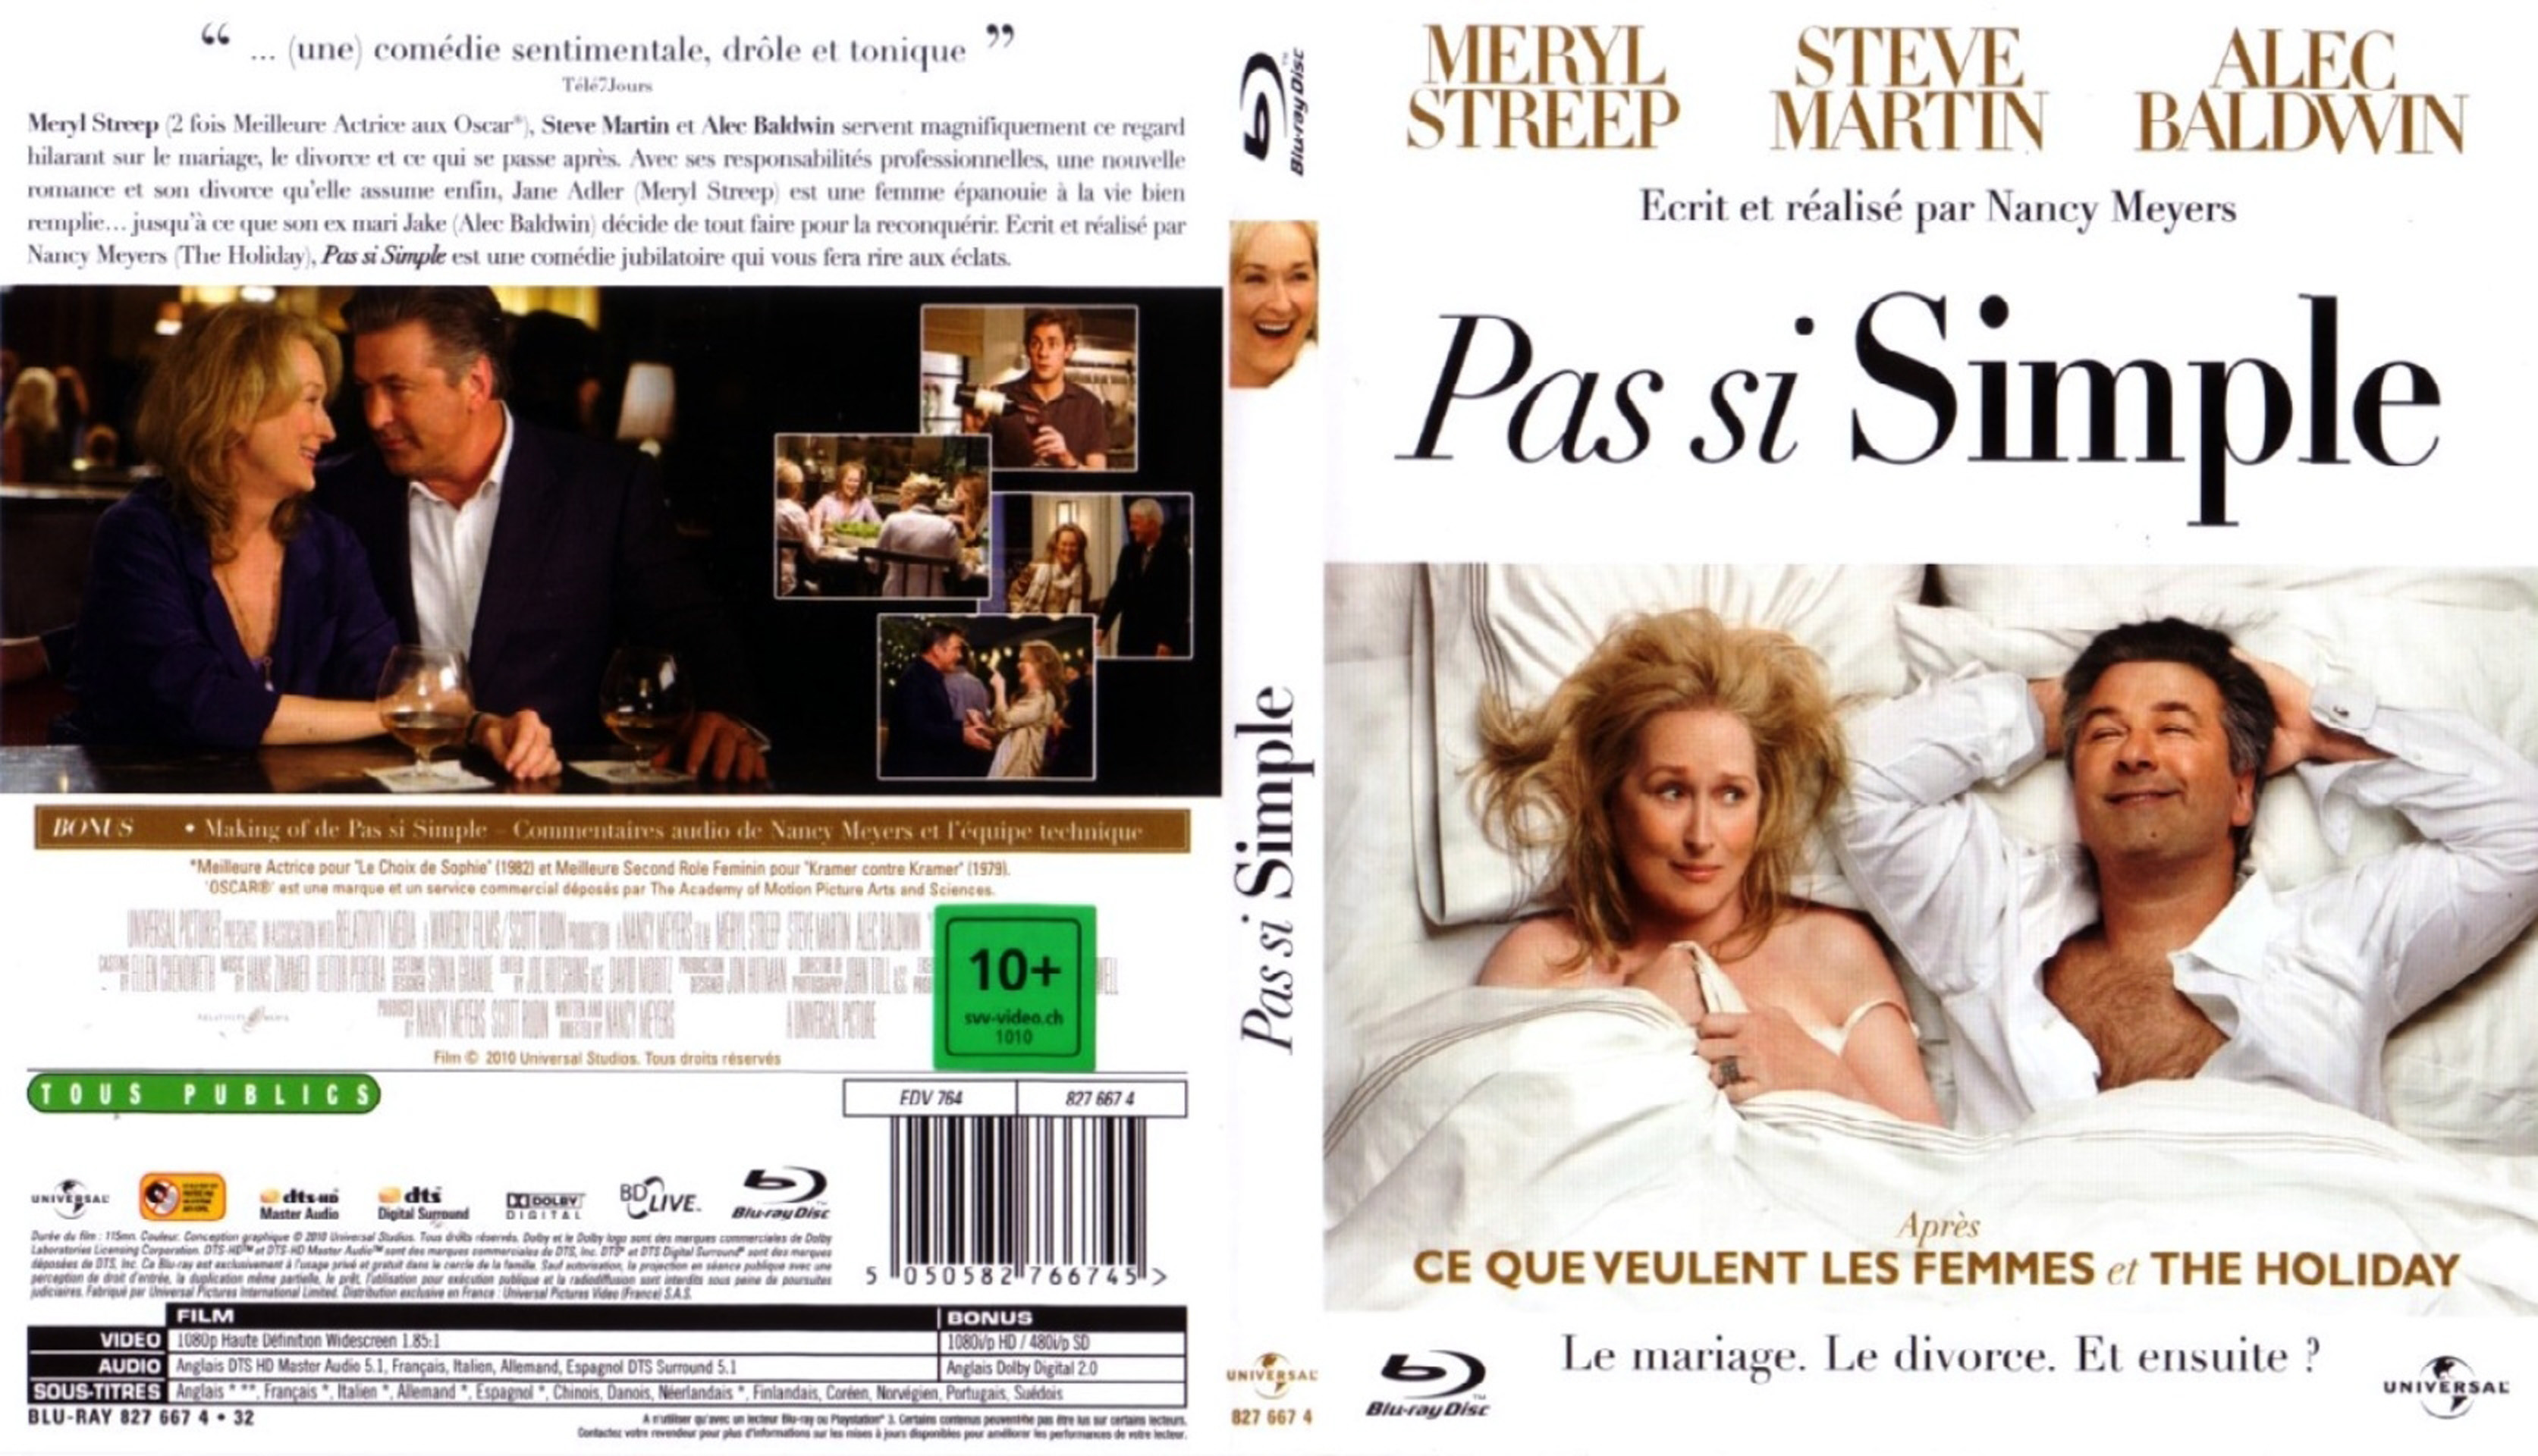 Jaquette DVD Pas si simple (BLU-RAY)